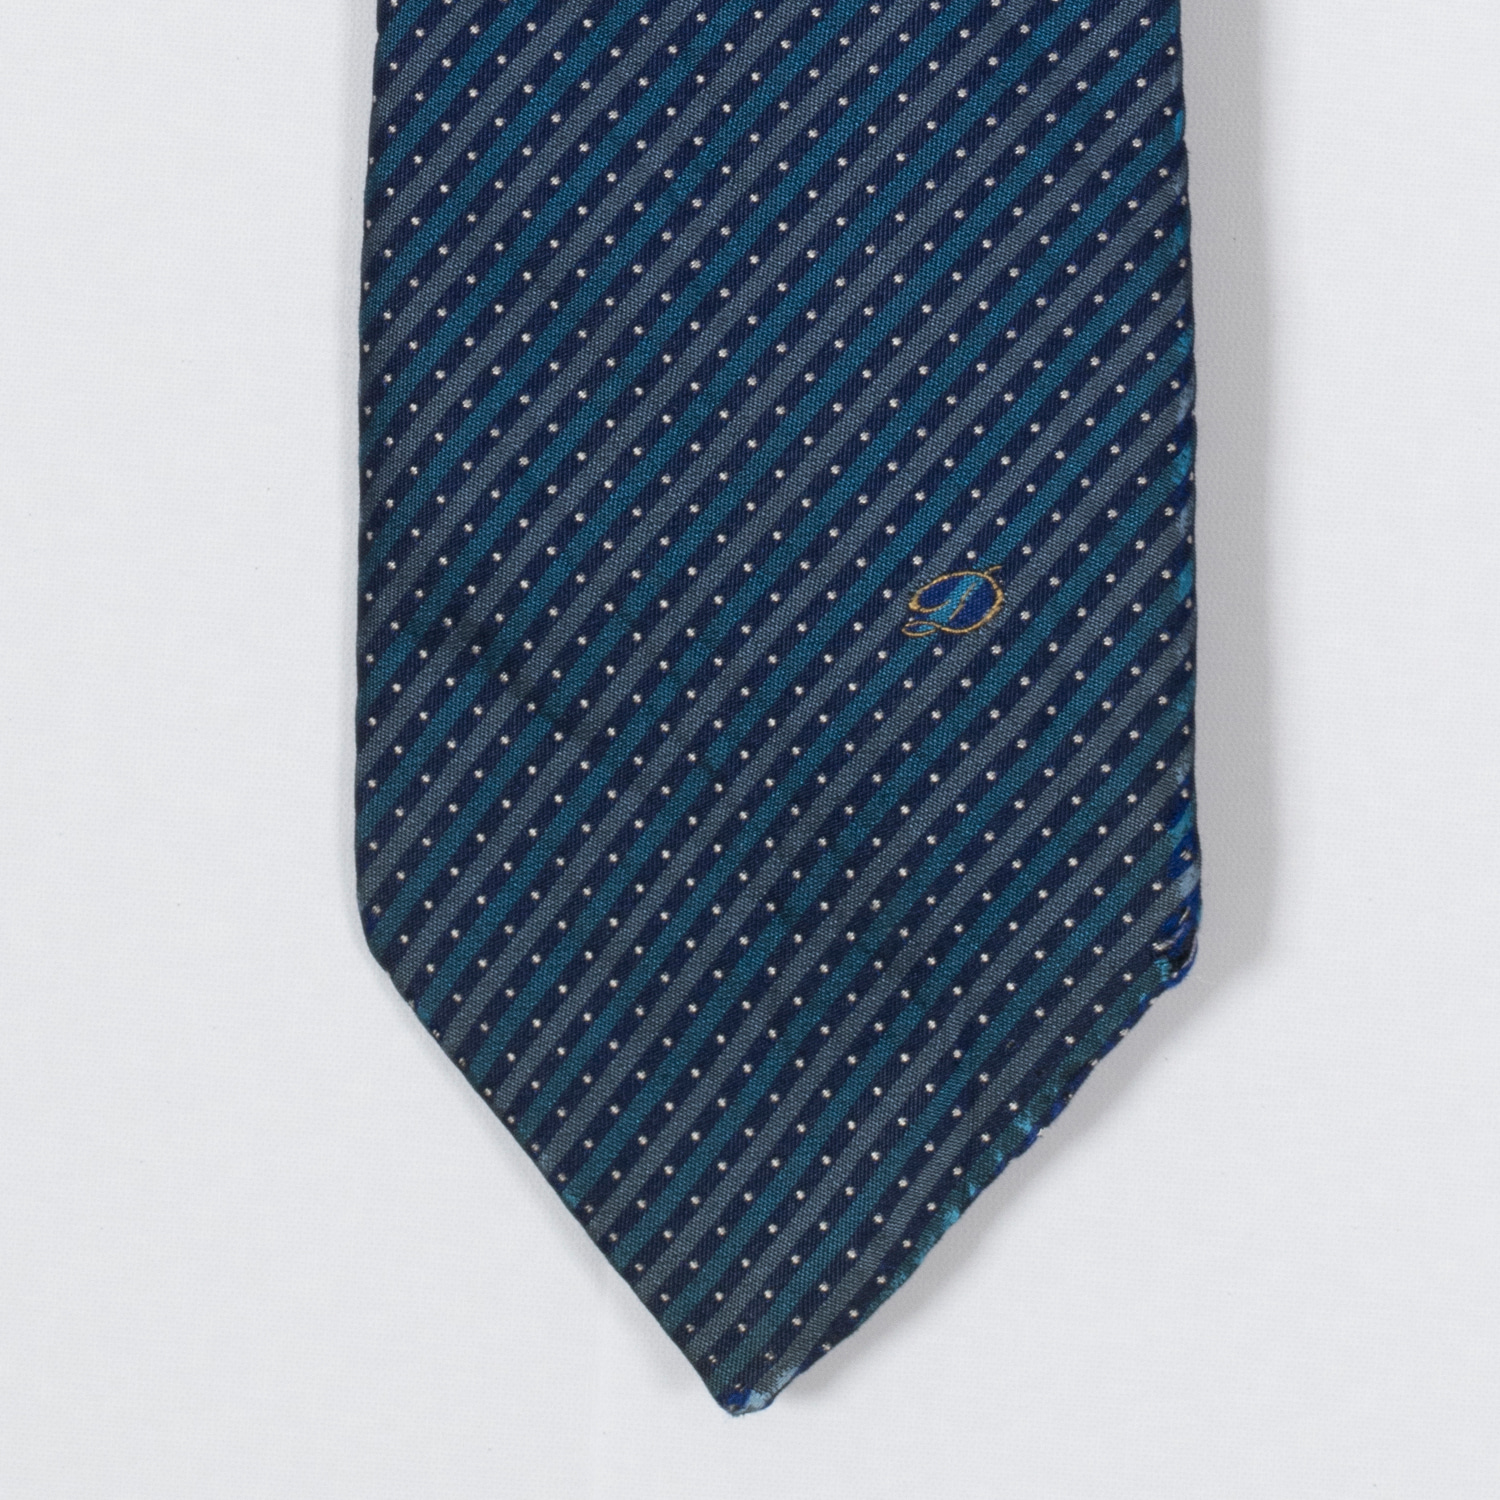 s.t. dupont ( made in france ) silk tie